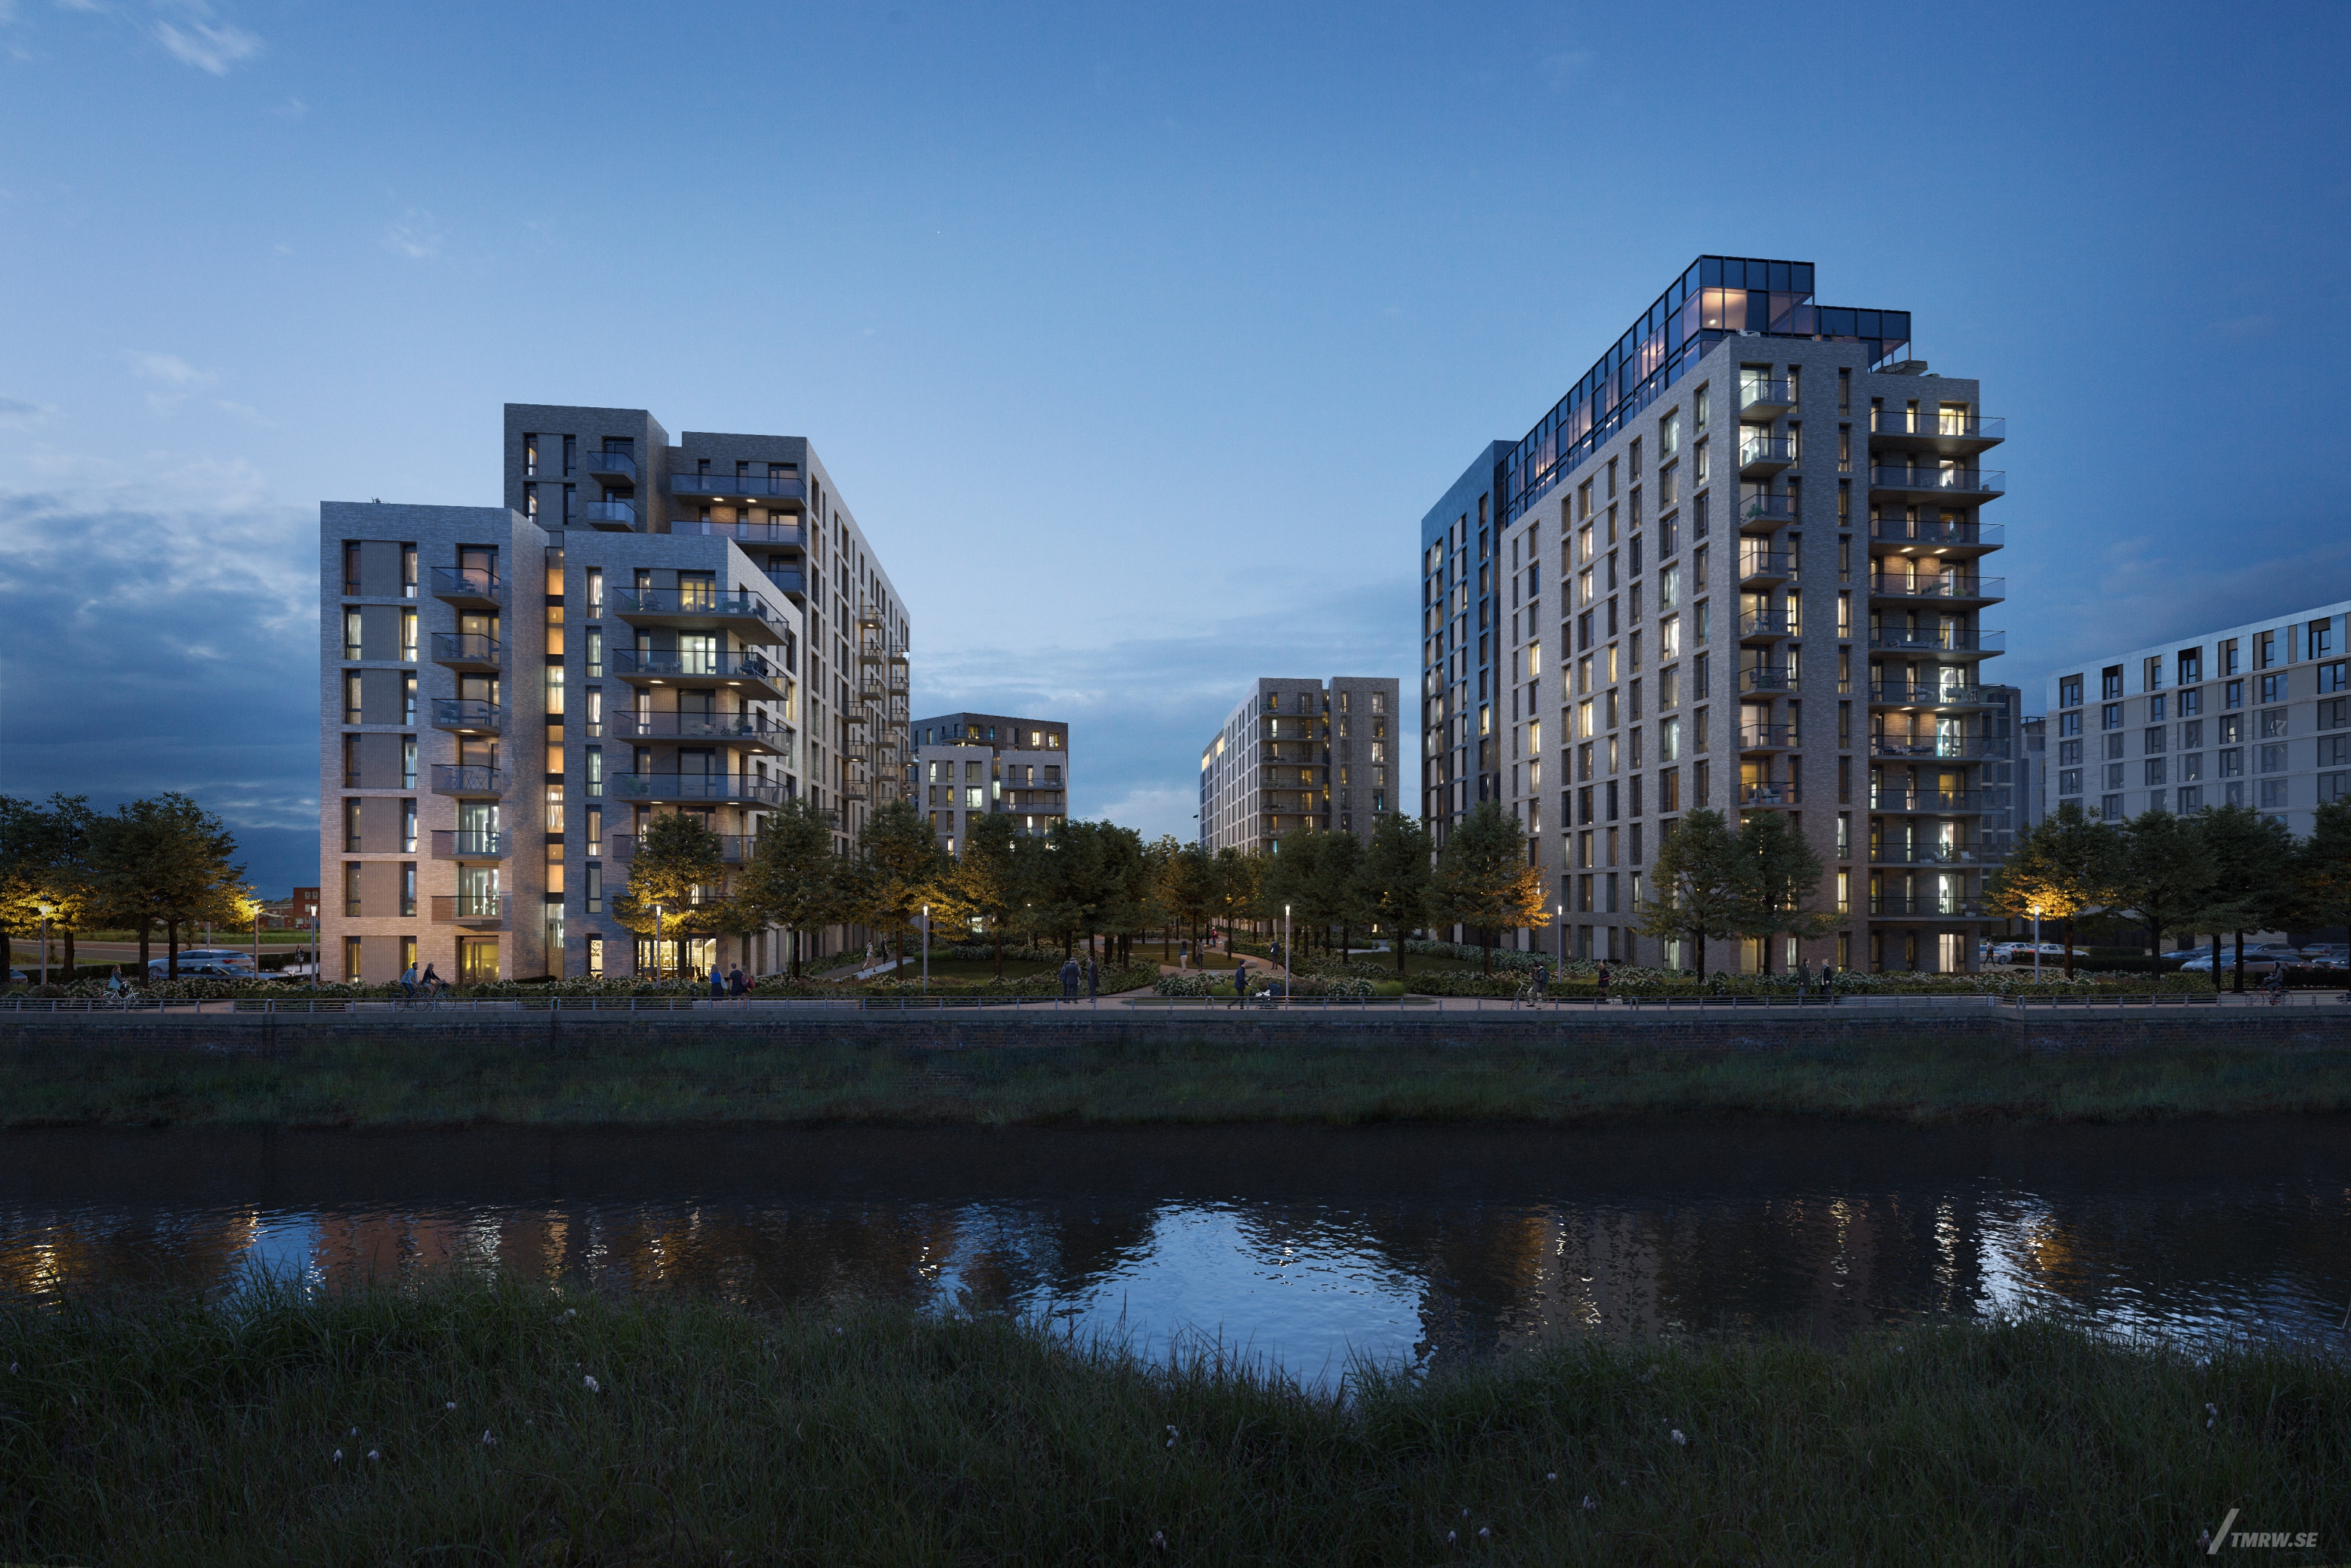 Architectural visualization of Leeds for CallisonRTKL. A view in front of the canal with the buildings behind. This is in the night light.